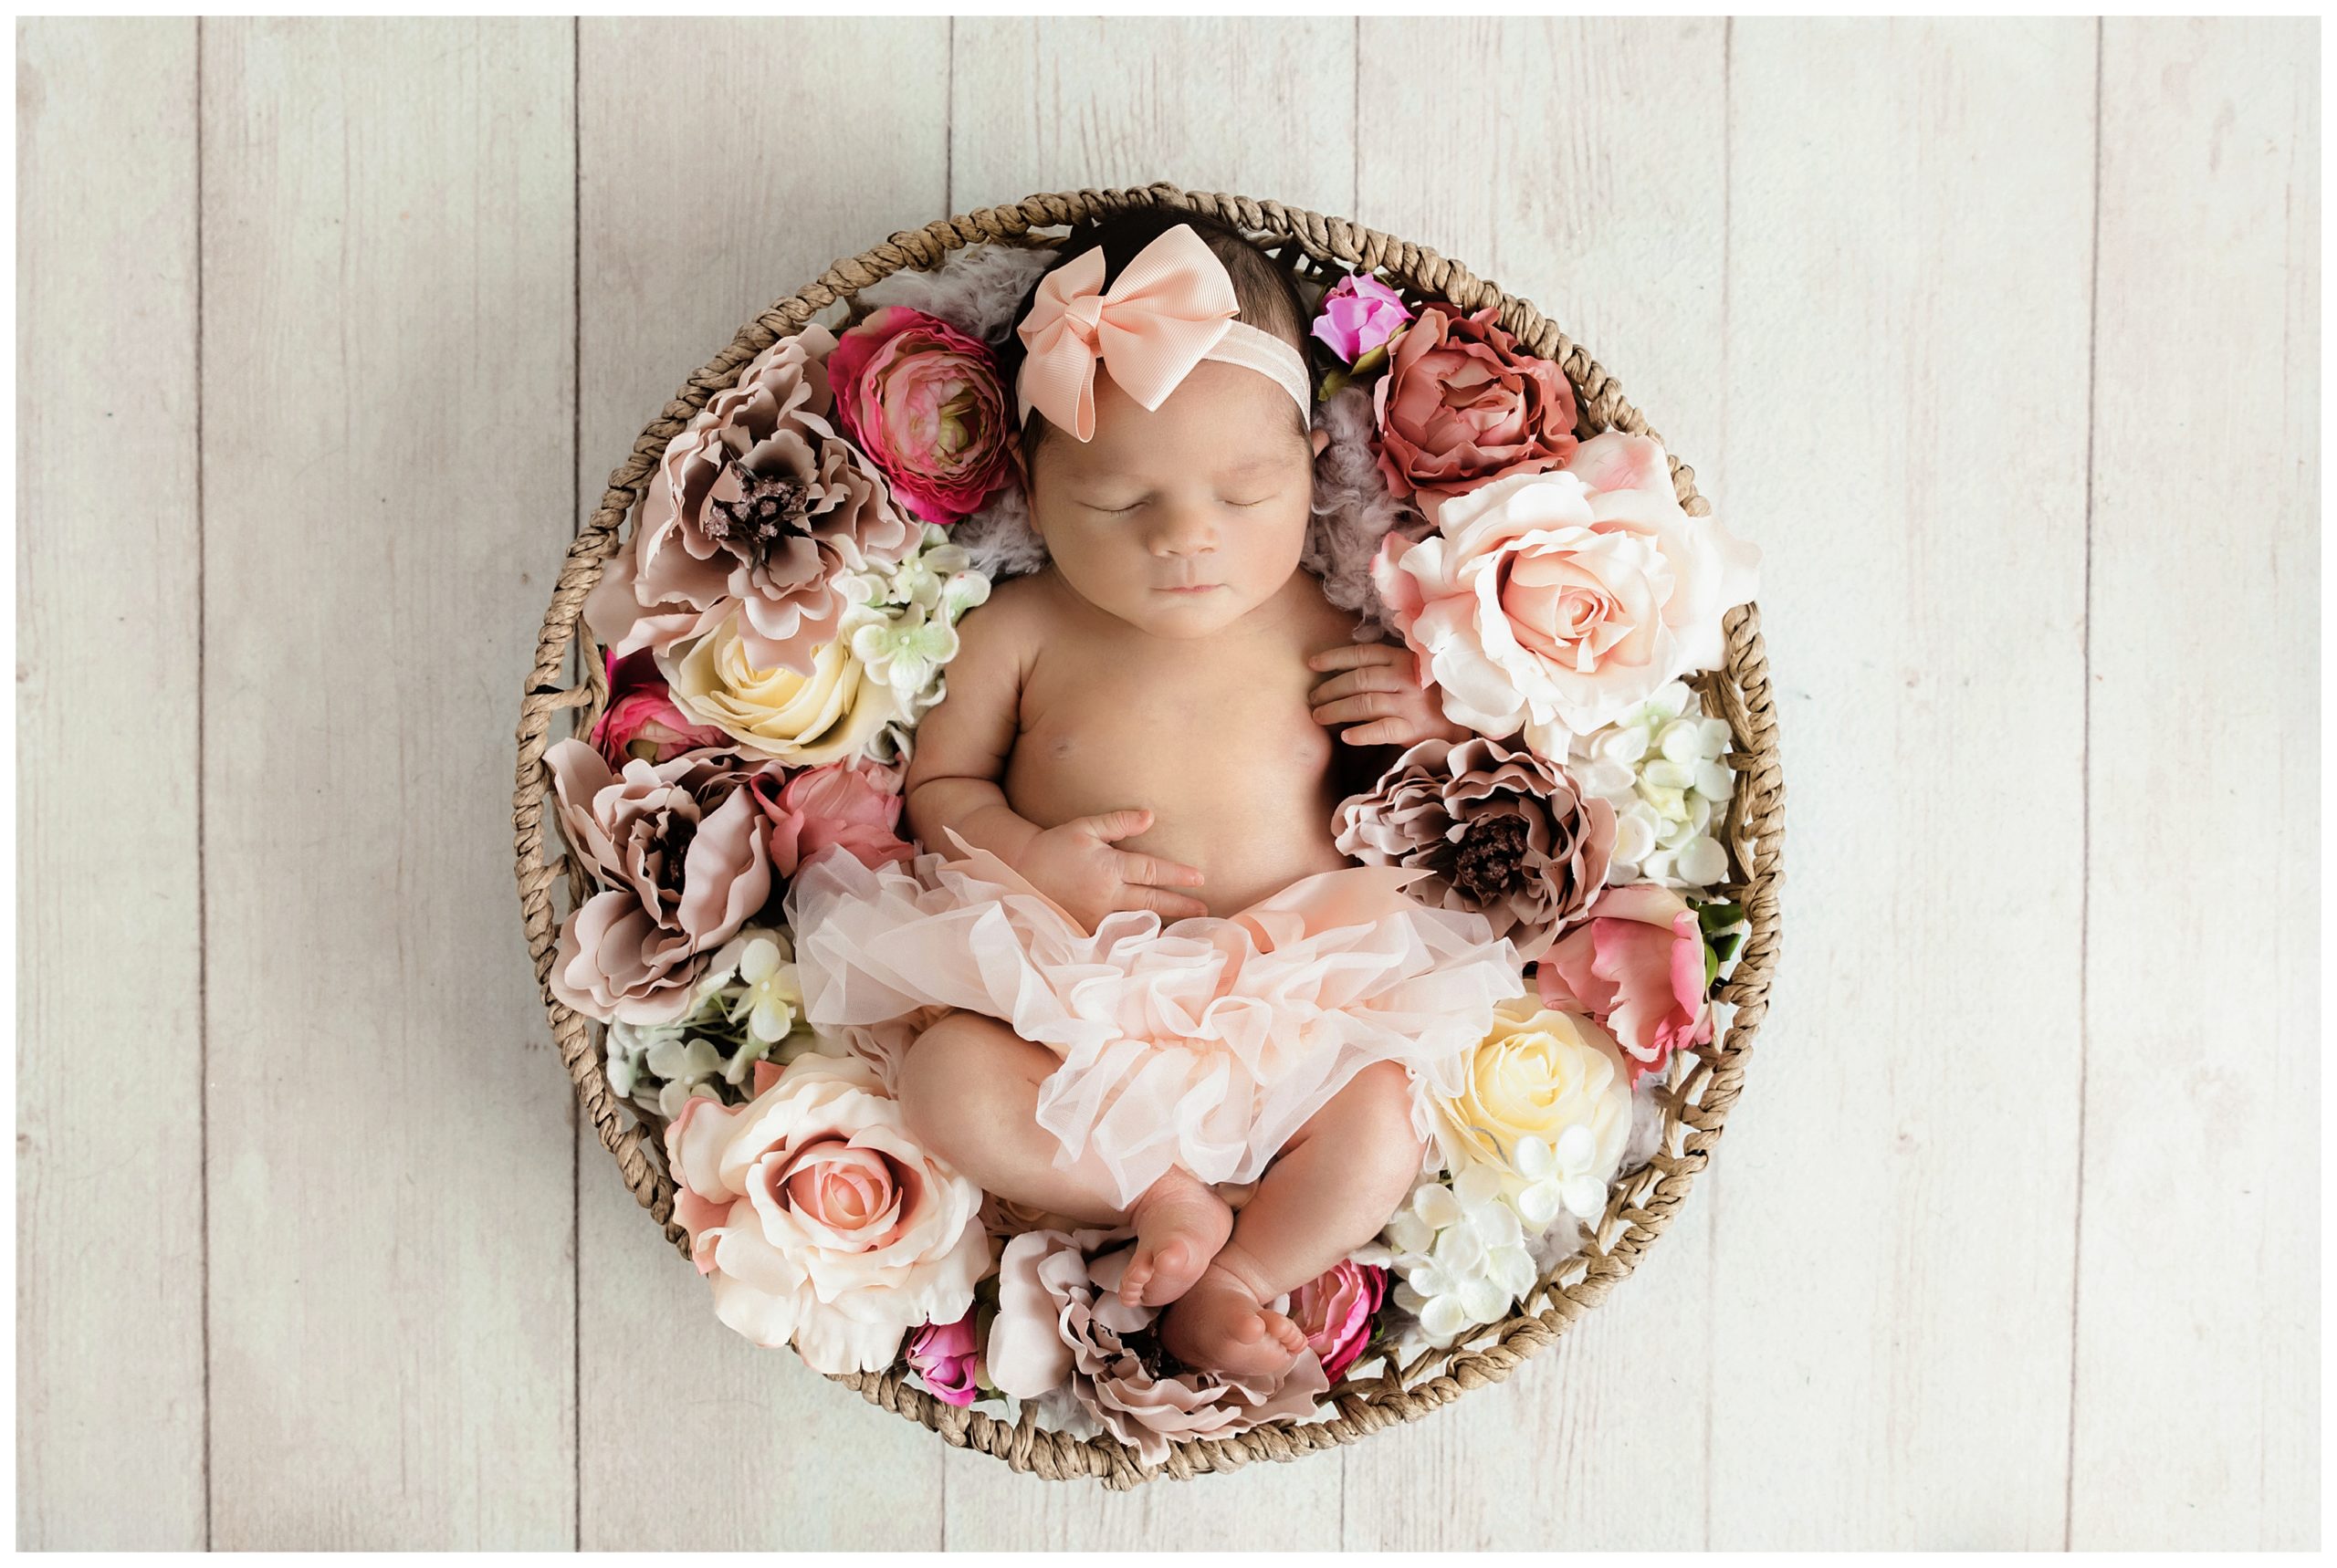 newborn girl in pink tutu and bow in basket surrounded by pink and cream flowers